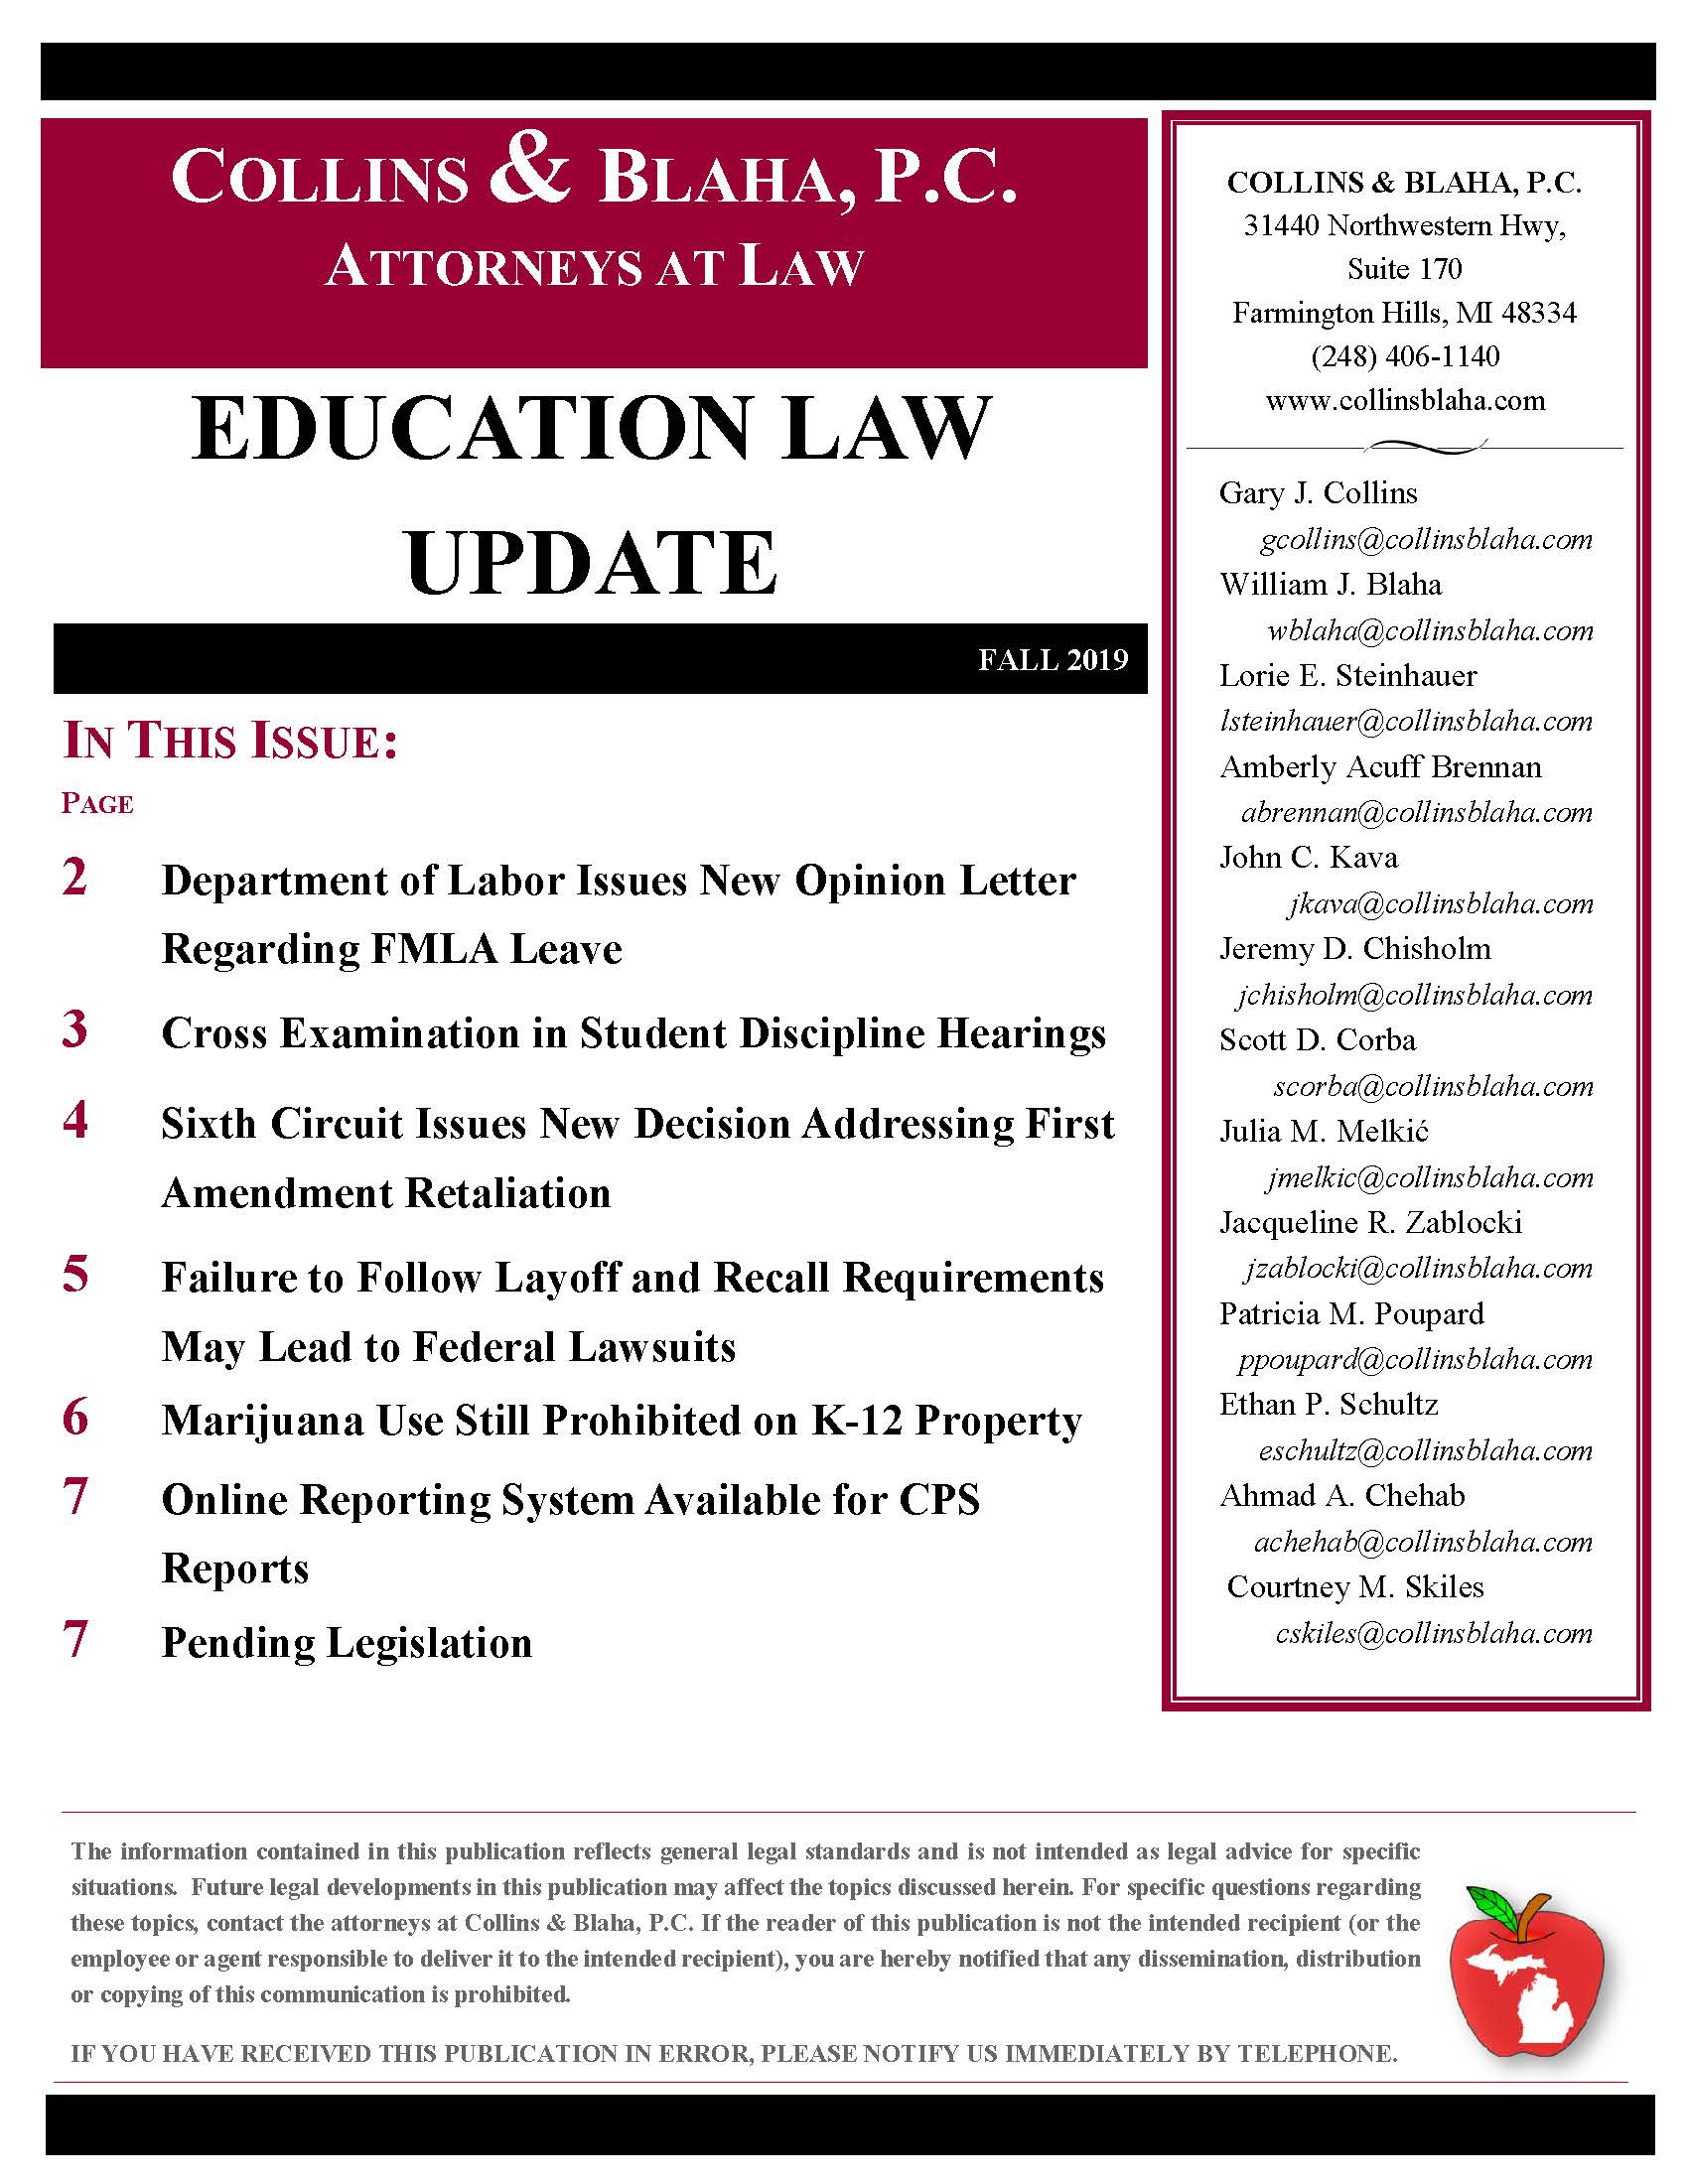 education-law-update-fall-2019_page_1